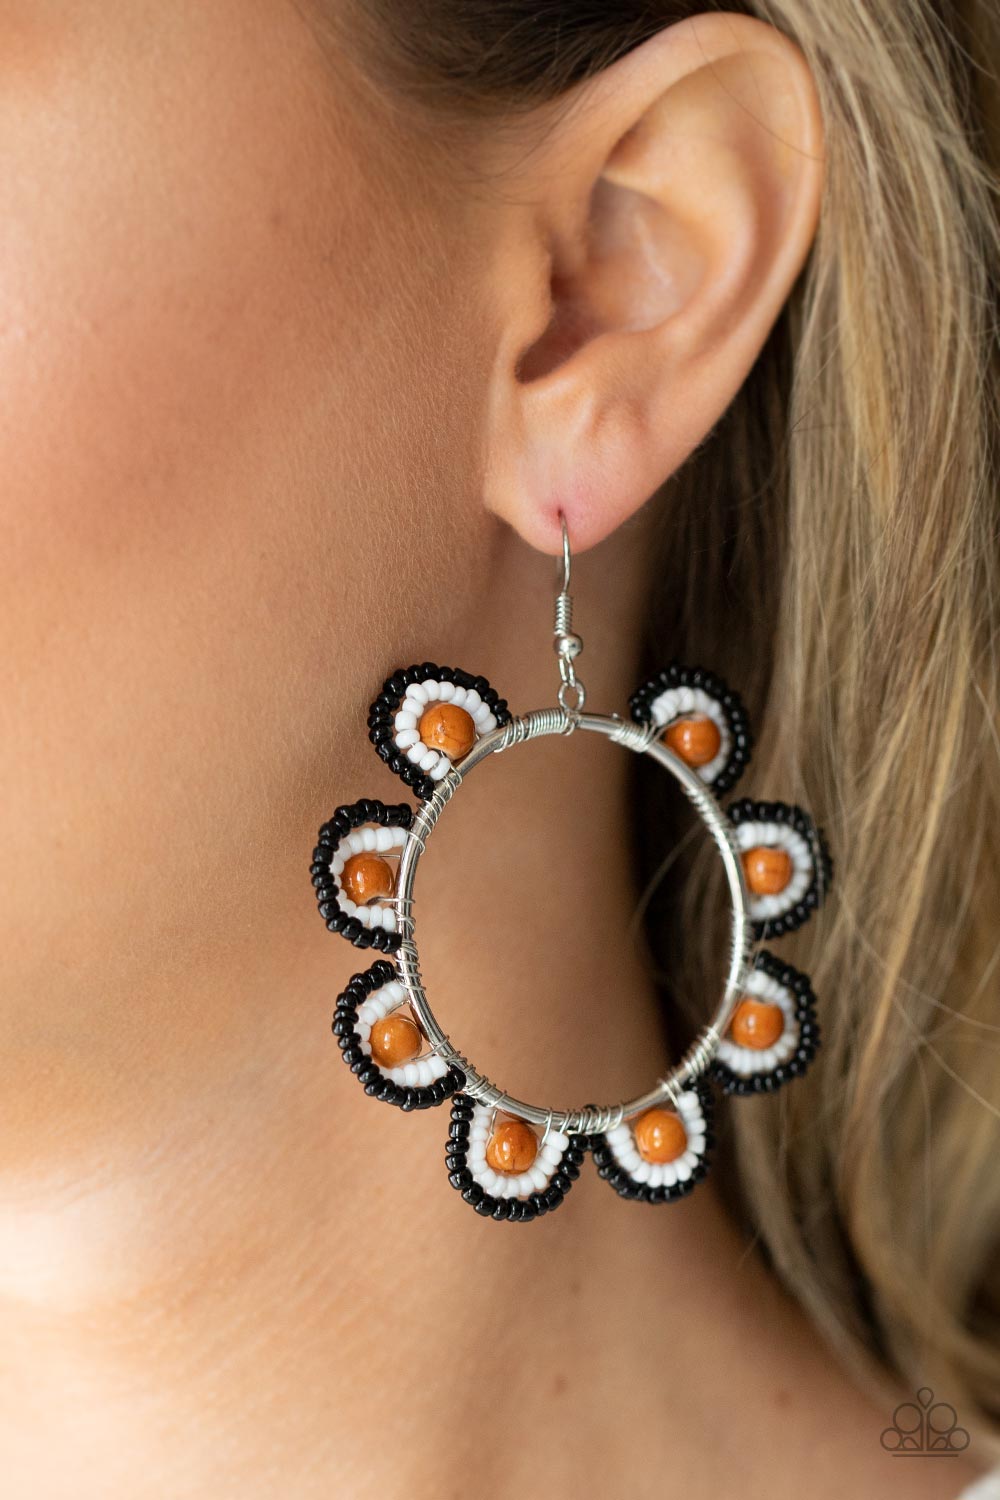 Groovy Gardens Brown Seed Bead Earring - Paparazzi Accessories  Infused with earthy brown stone bead centers, rows of black and white seed beads are threaded along dainty wires along the outside of a shiny silver hoop for a vivacious floral look. Earring attaches to a standard fishhook fitting.  Sold as one pair of earrings.